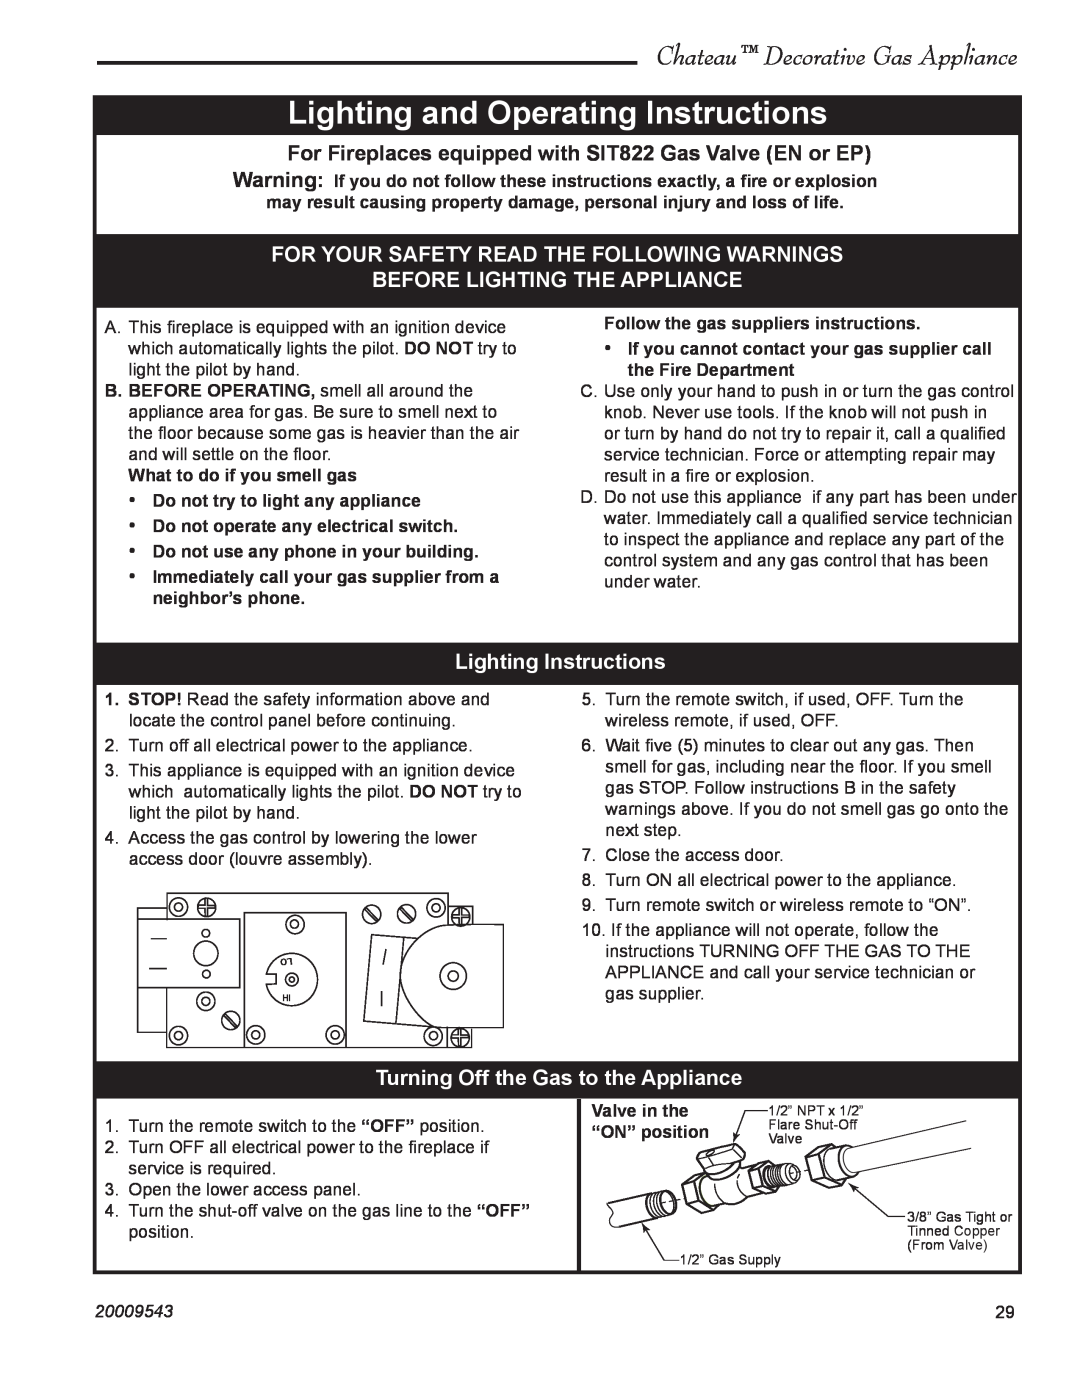 Vermont Casting DVT38S2 Lighting and Operating Instructions, For Your Safety Read The Following Warnings, Valve in the 